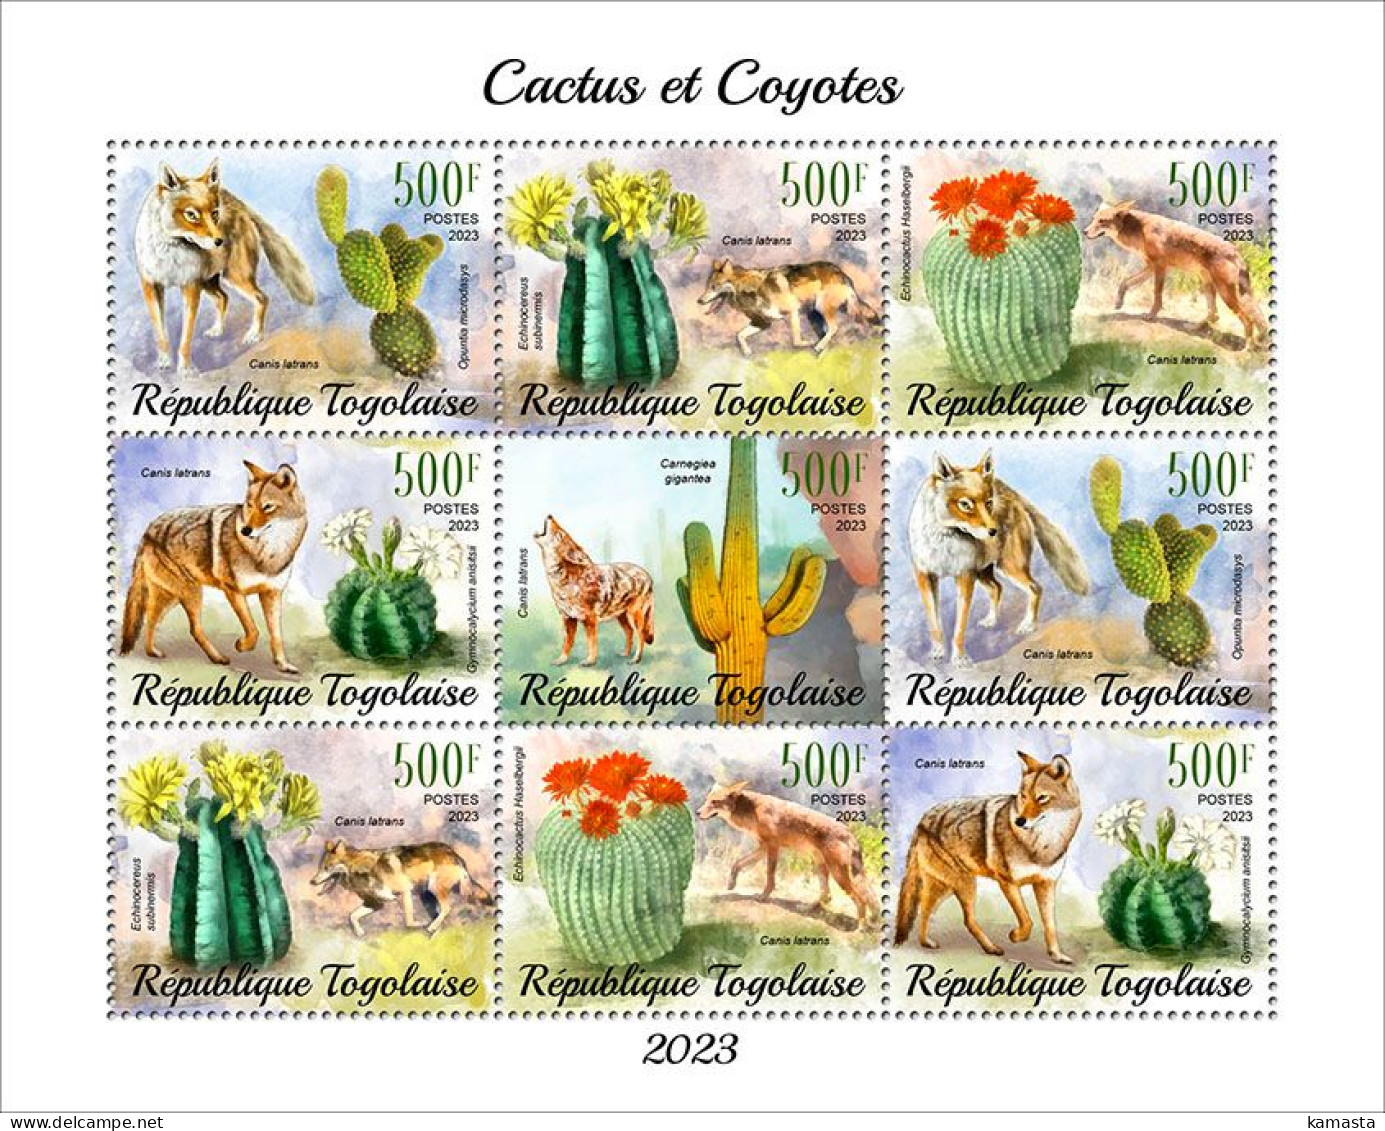 Togo 2023 Cactus And Coyotes. (249f22) OFFICIAL ISSUE - Cactus